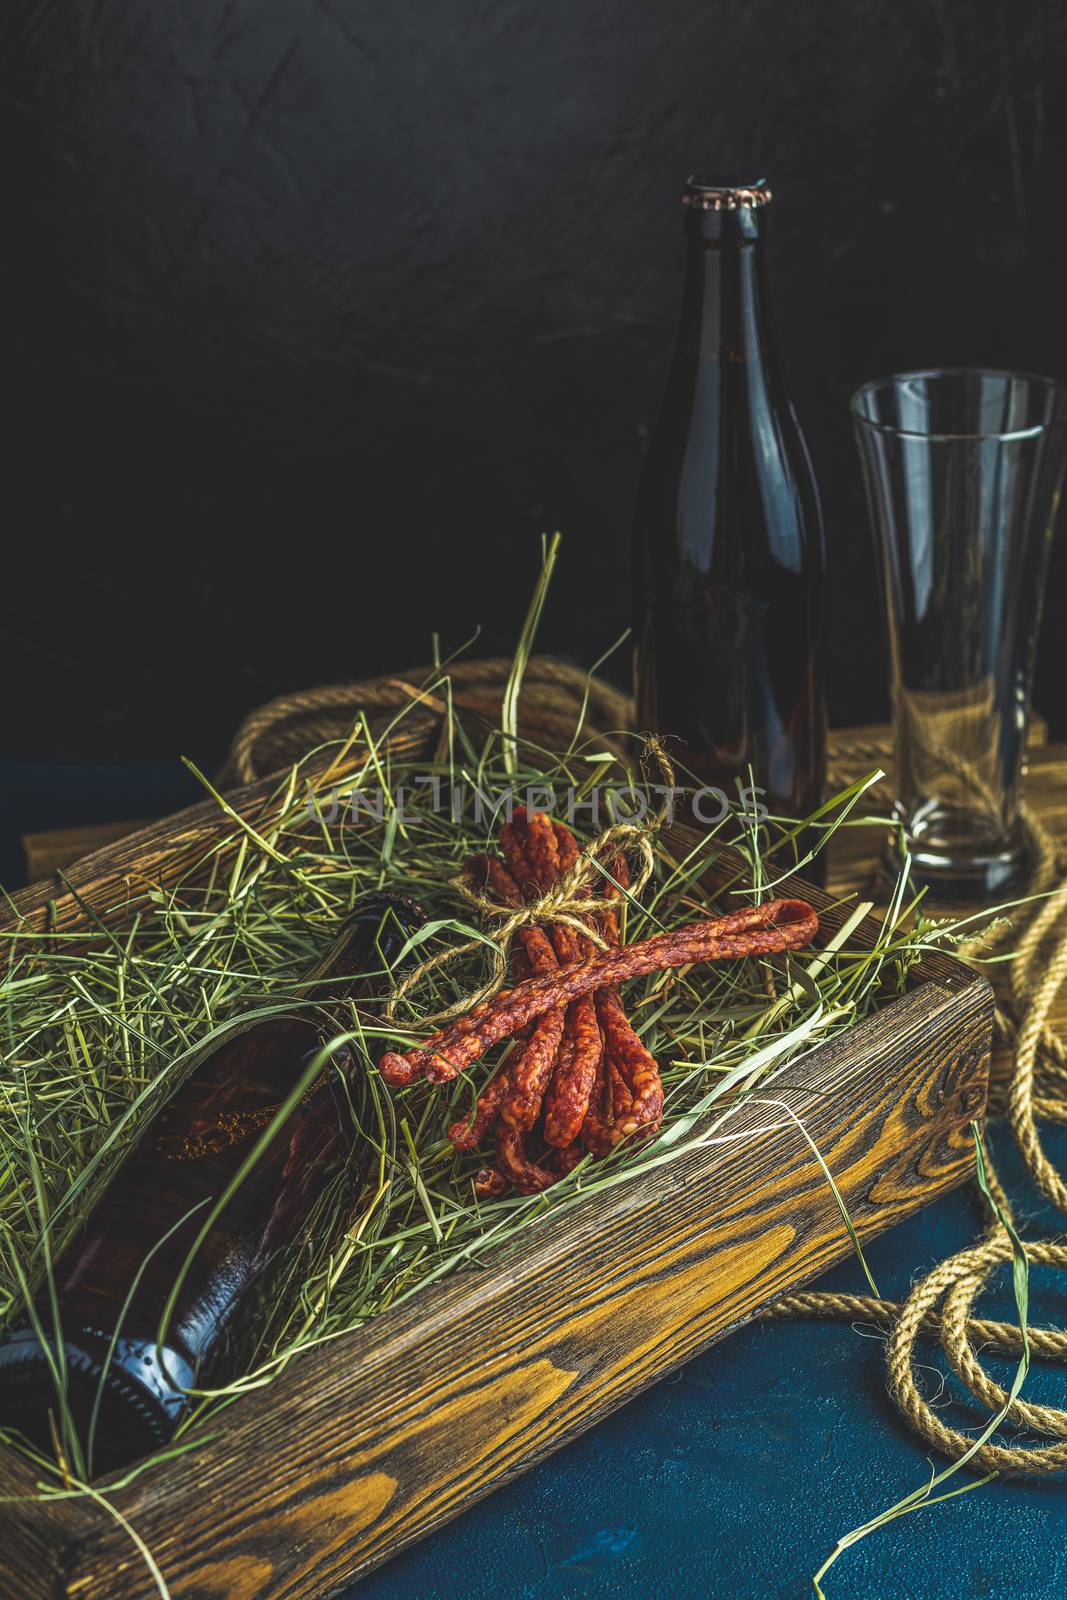 Craft beer with sausages kabanosi in the wooden box above fresh hay or dried grass beside beer bottle and drinking glass, dark rustic style.